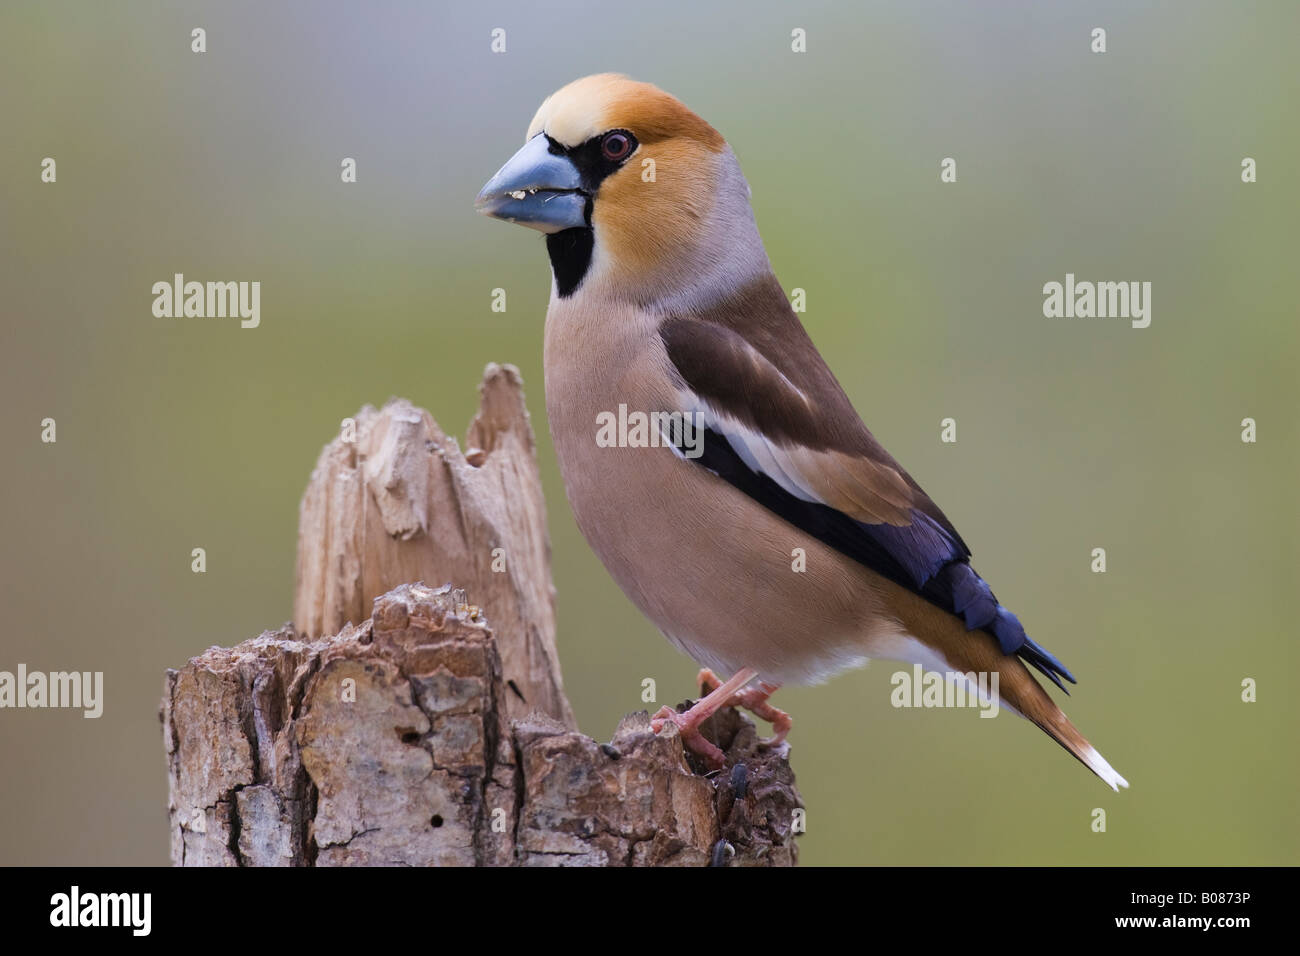 Male Hawfinch (Coccothraustes coccothraustes) Stock Photo